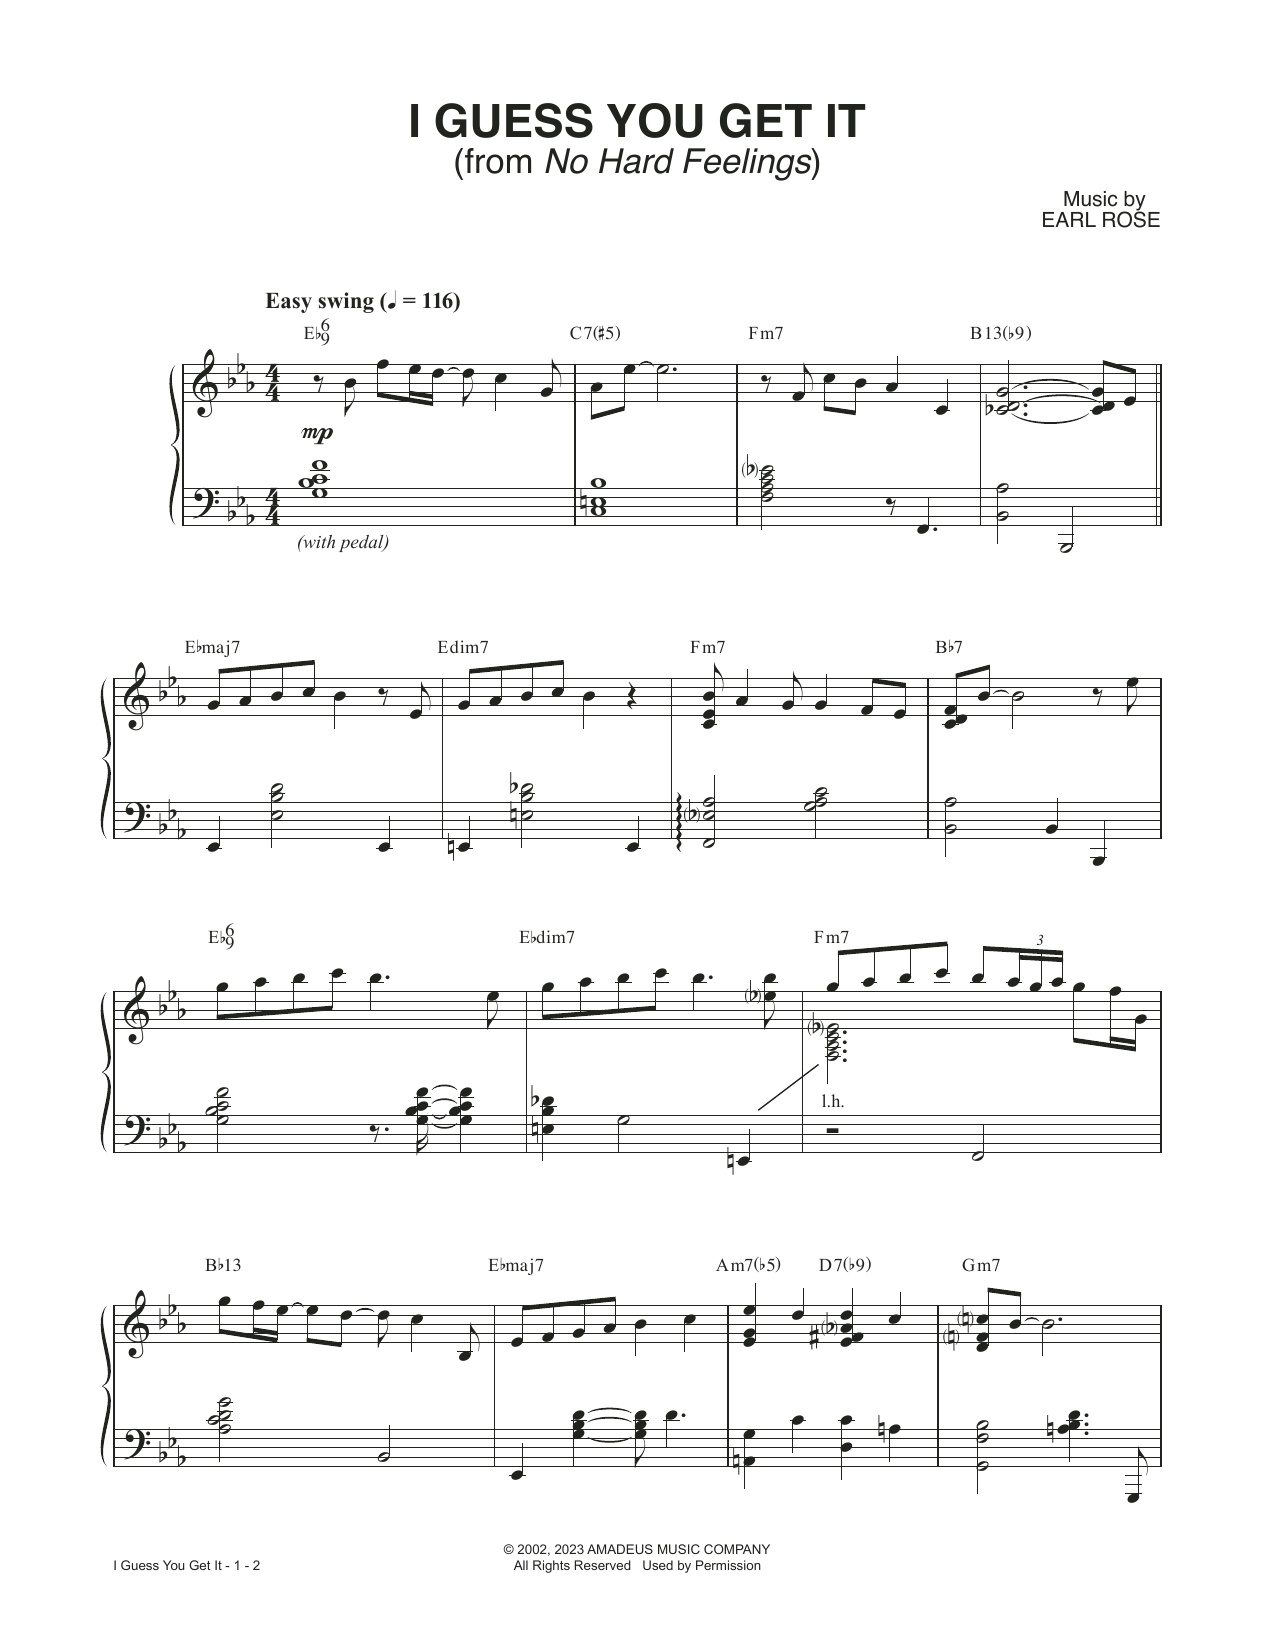 Earl Rose I Guess You Get It (from No Hard Feelings) sheet music notes printable PDF score